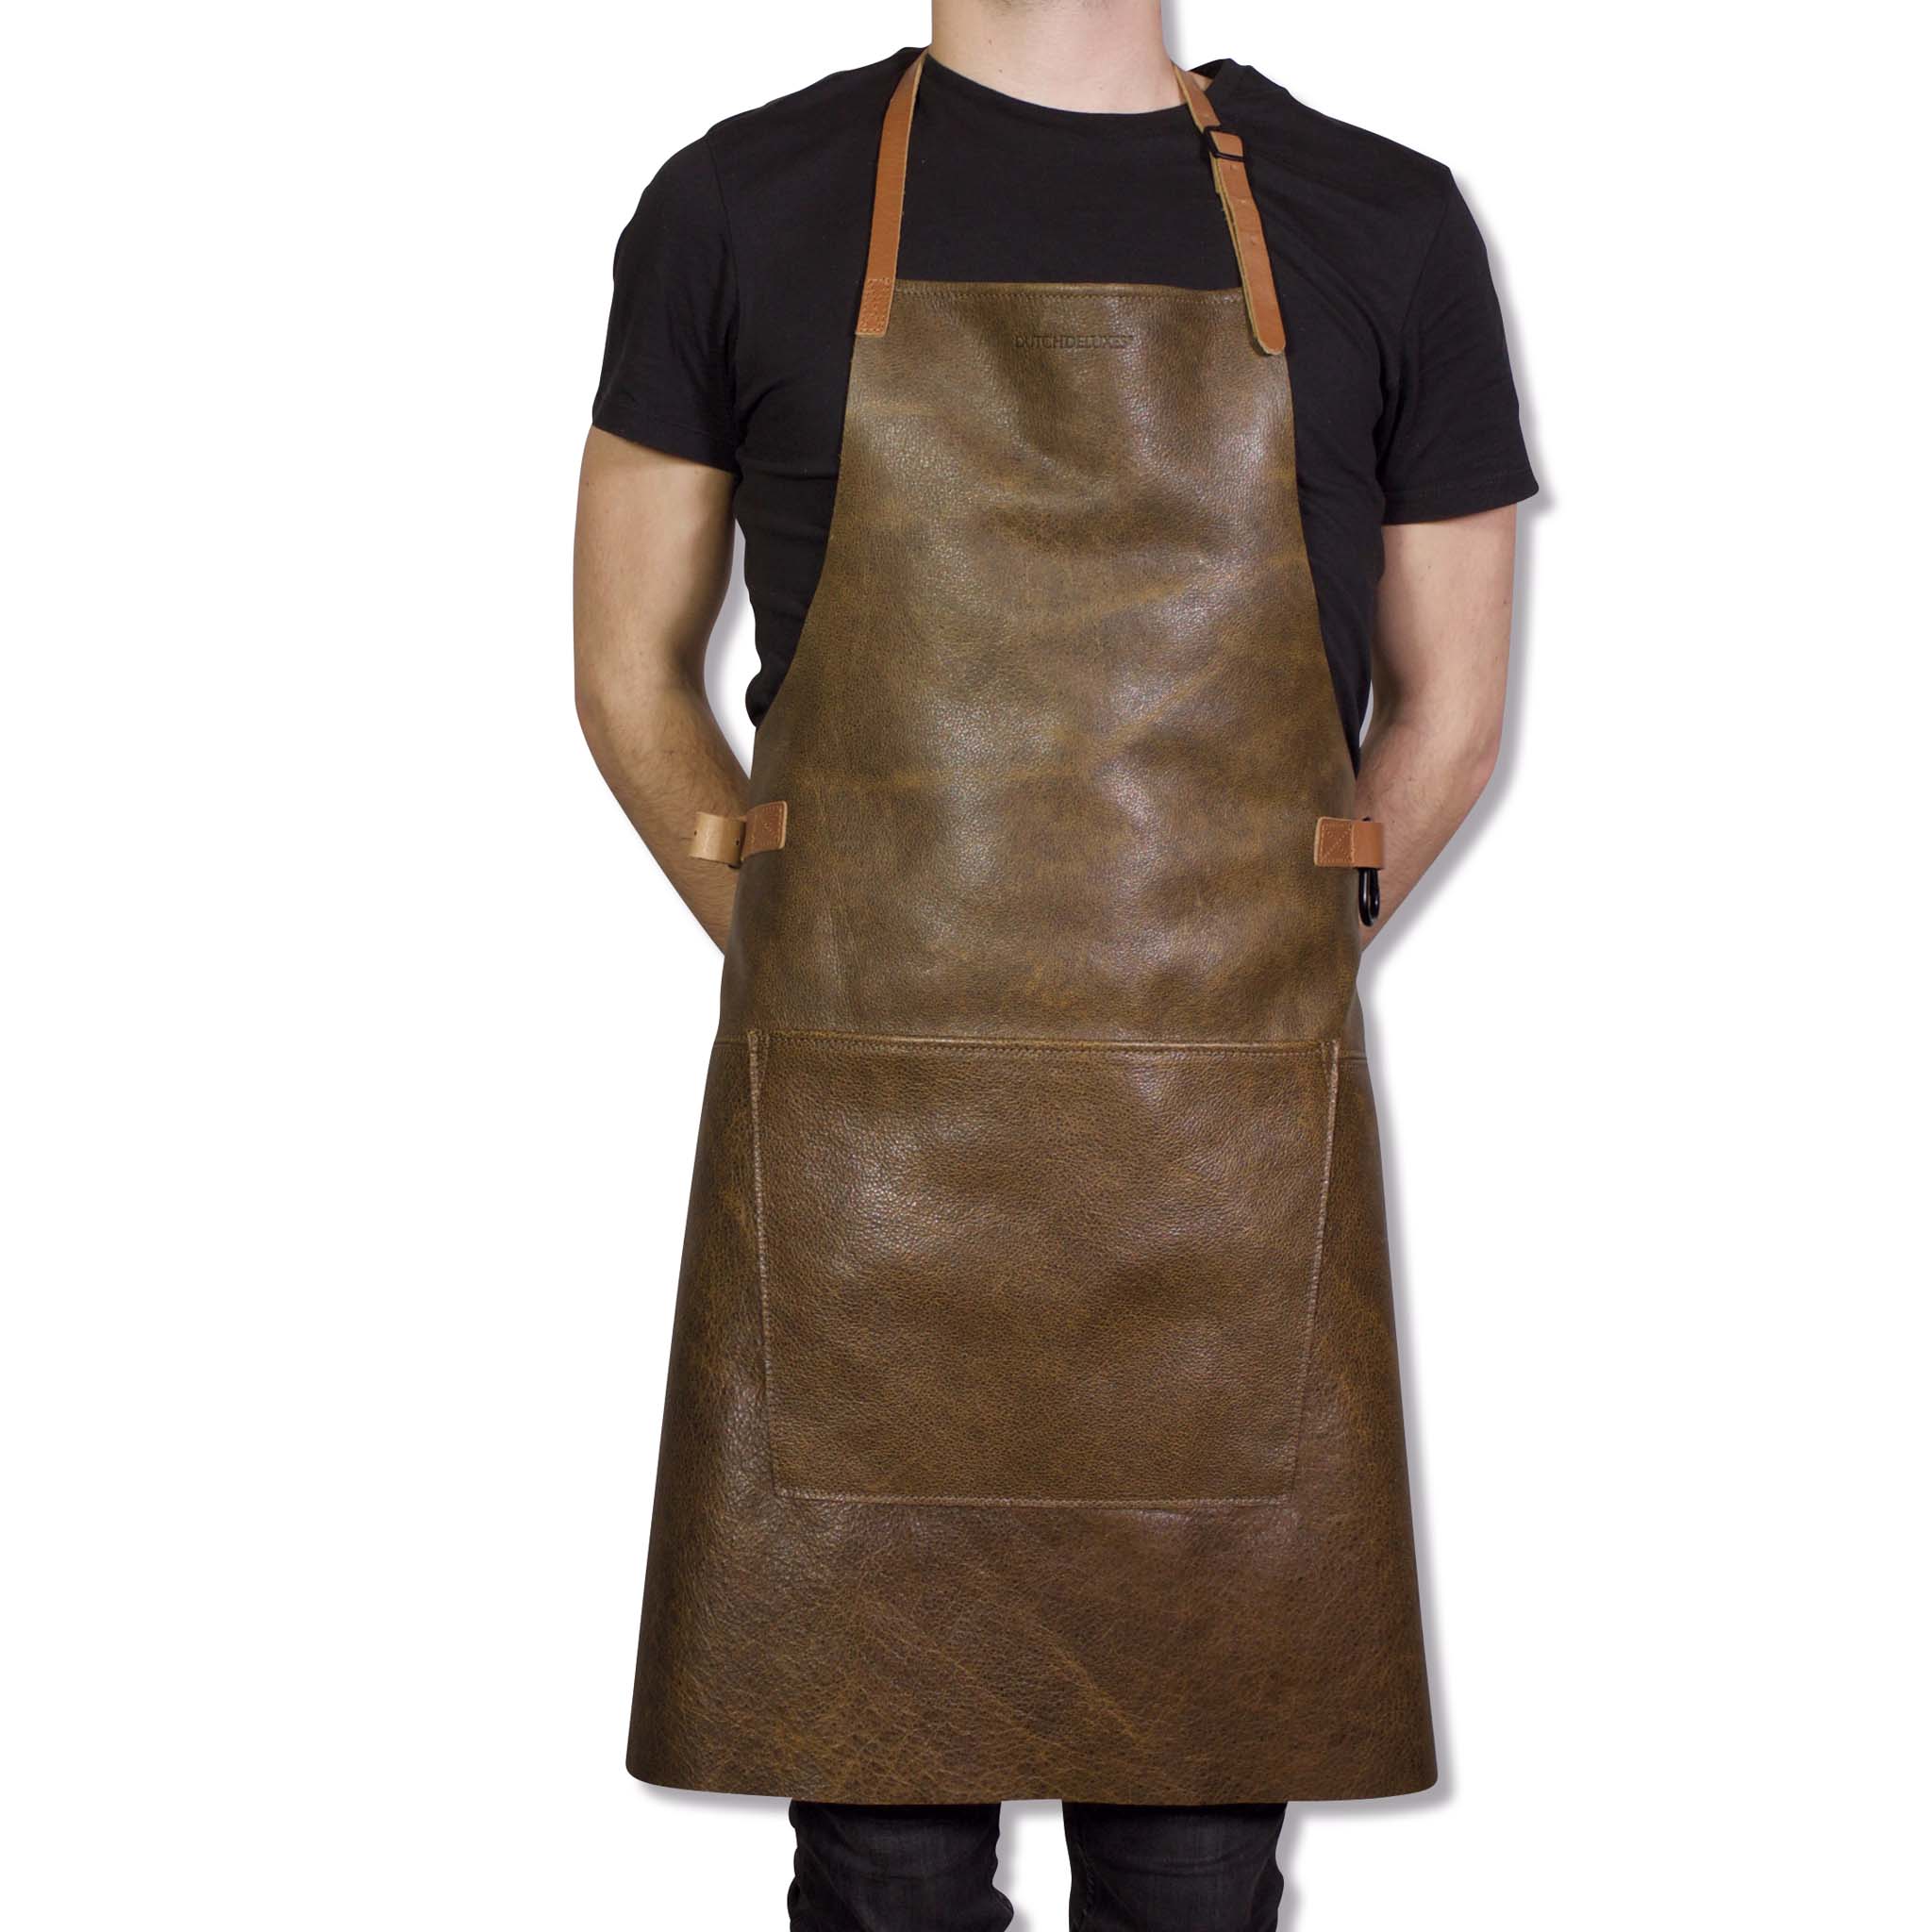 Dutchdeluxes Leather BBQ Apron in Vintage Brown Cookware Kitchen Clothing Model